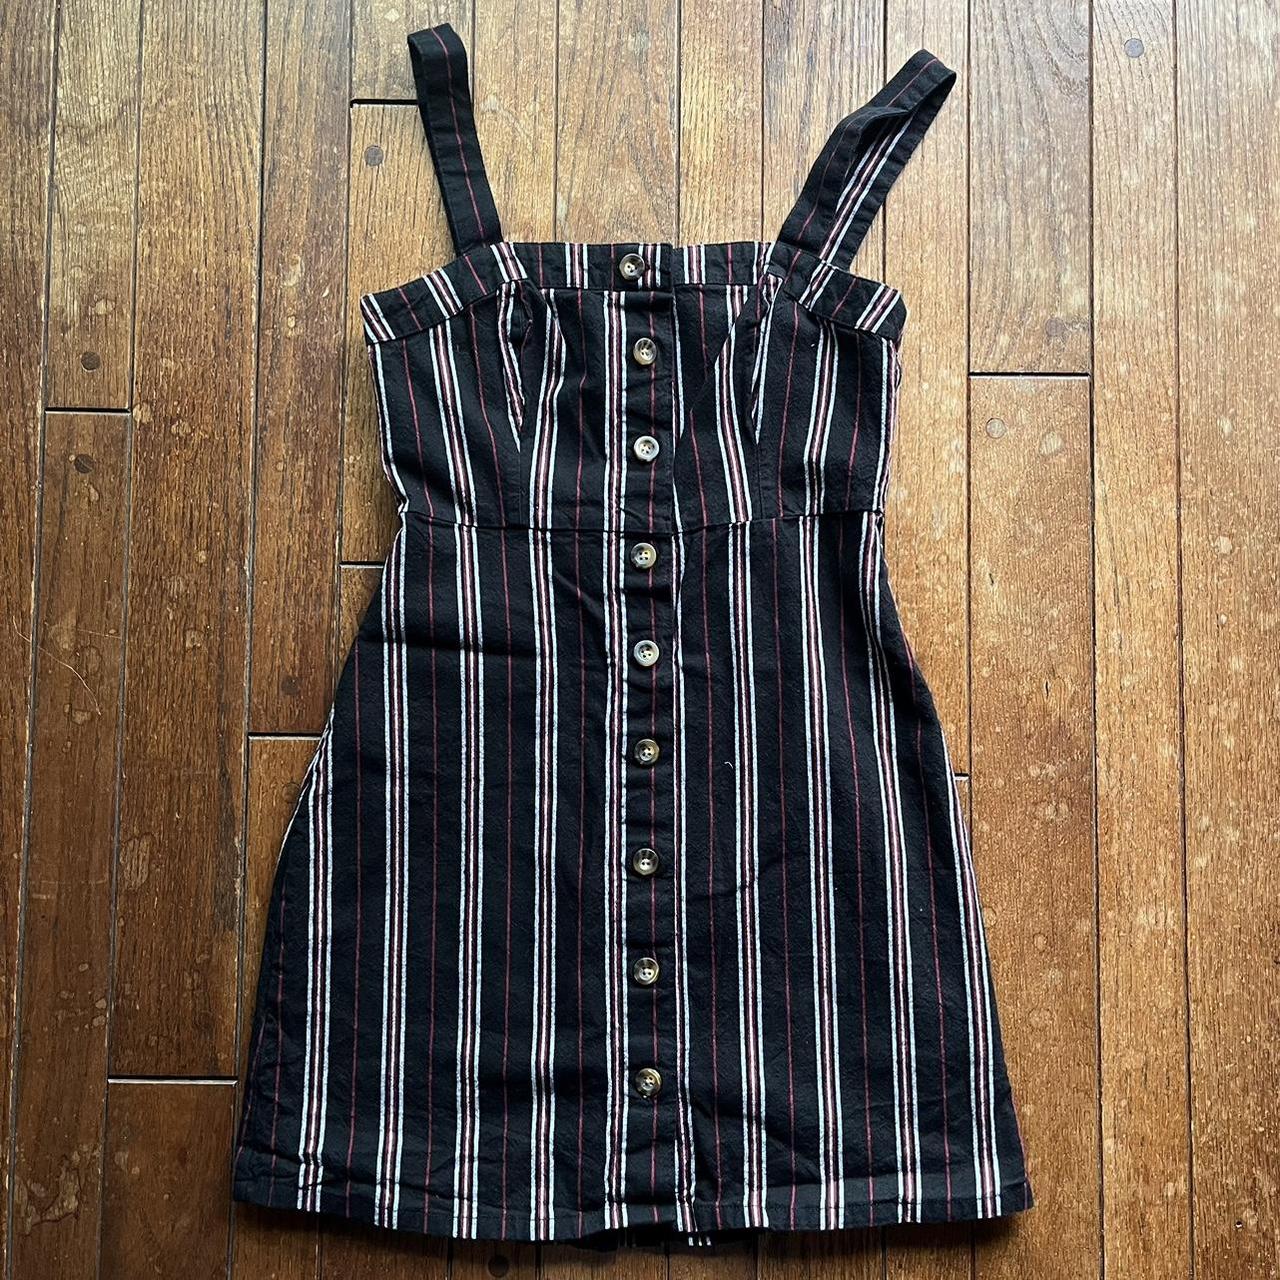 STRIPED BUTTON-UP DRESS. Made by Hollister. This - Depop